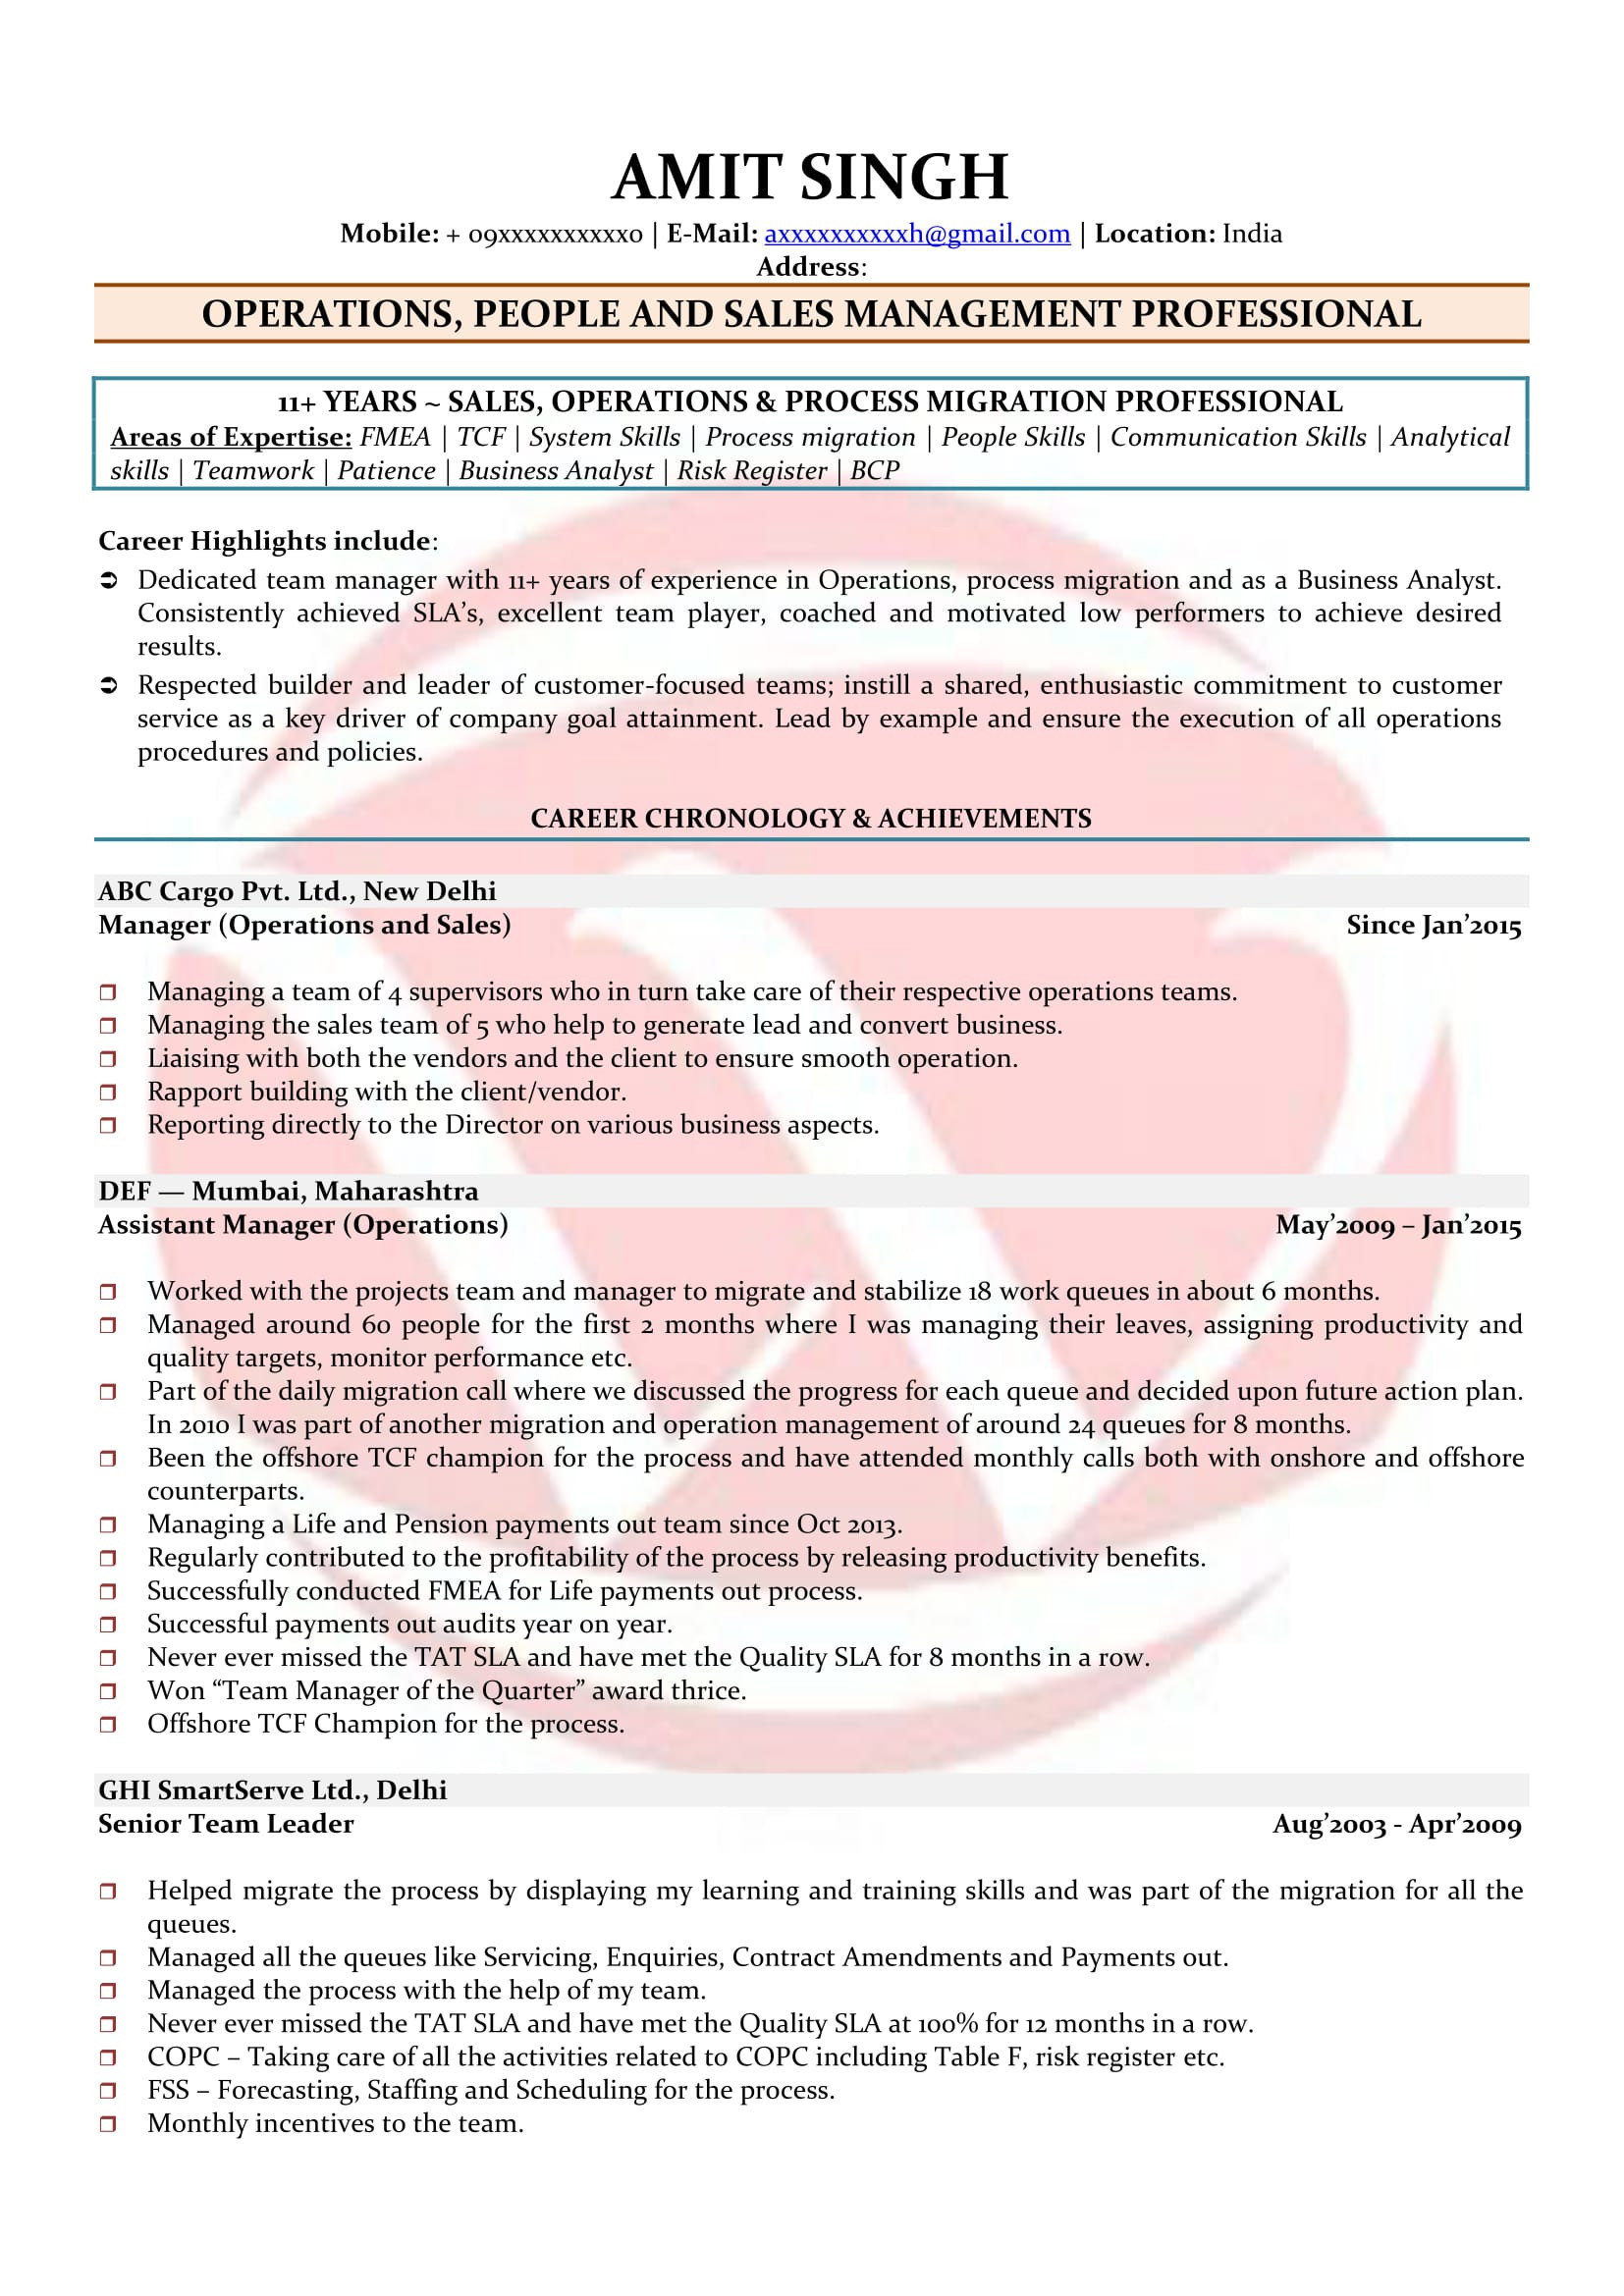 Sample Resume for Mutual Fund Operations People Management Sample Resumes, Download Resume format Templates!